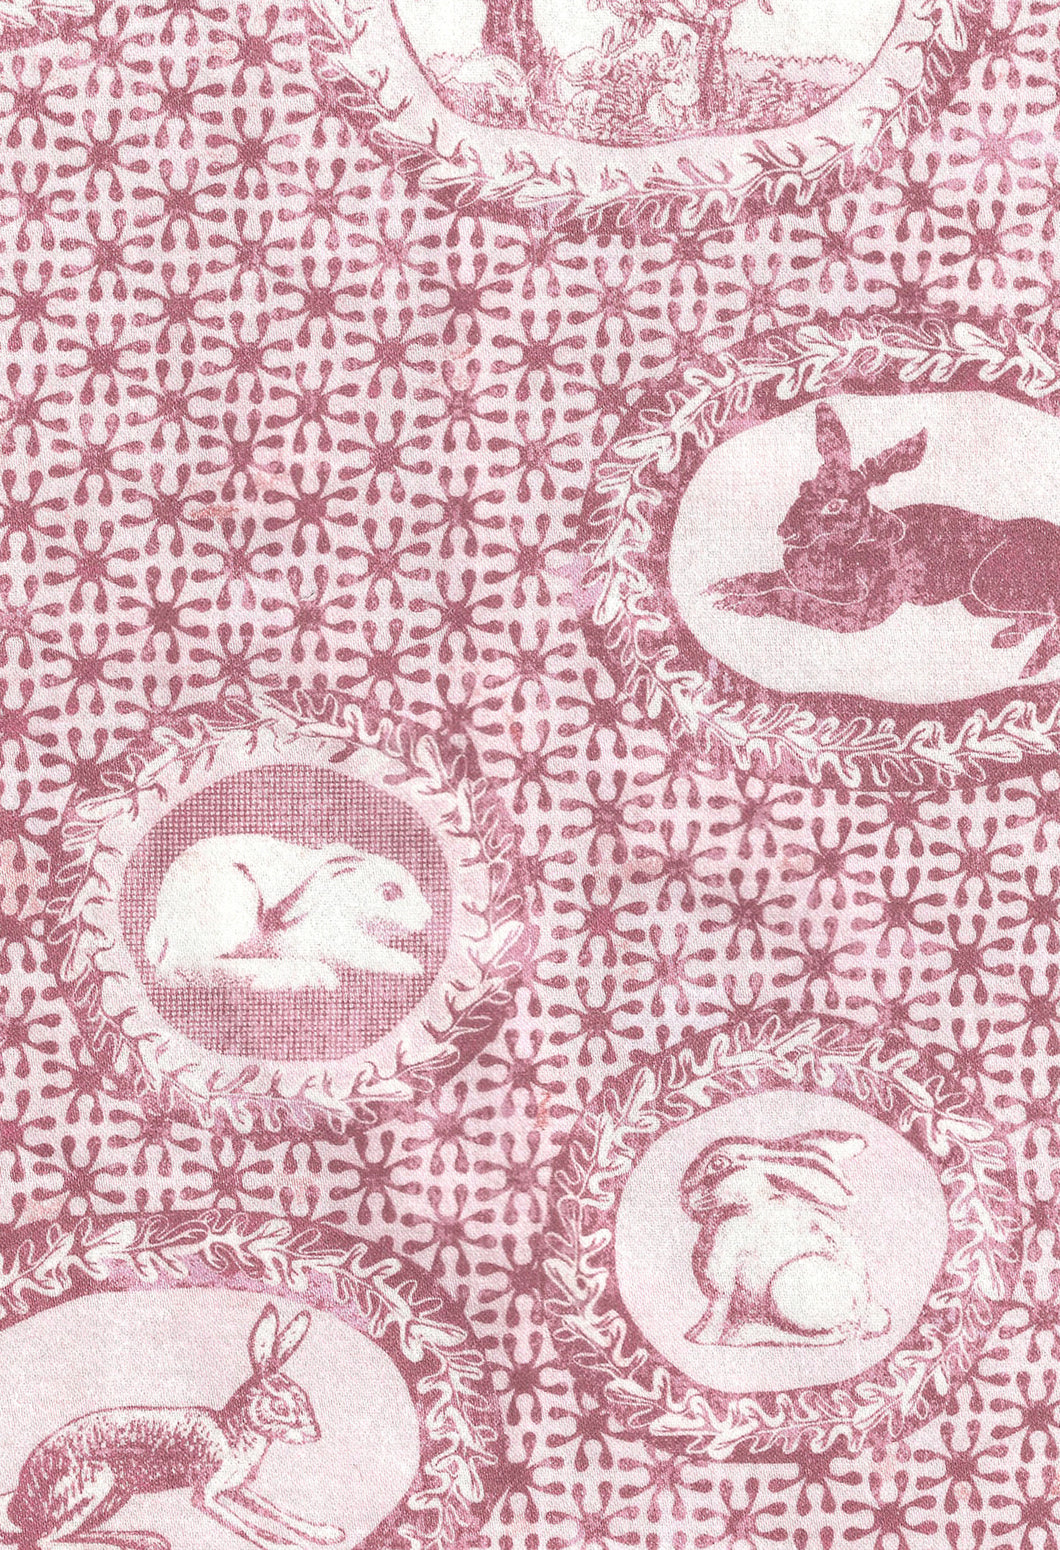 Toile de Jouy style fabric,faded red.with rabbits and bunnies printed,classic style independent designer,textiles,patterns by the metre.